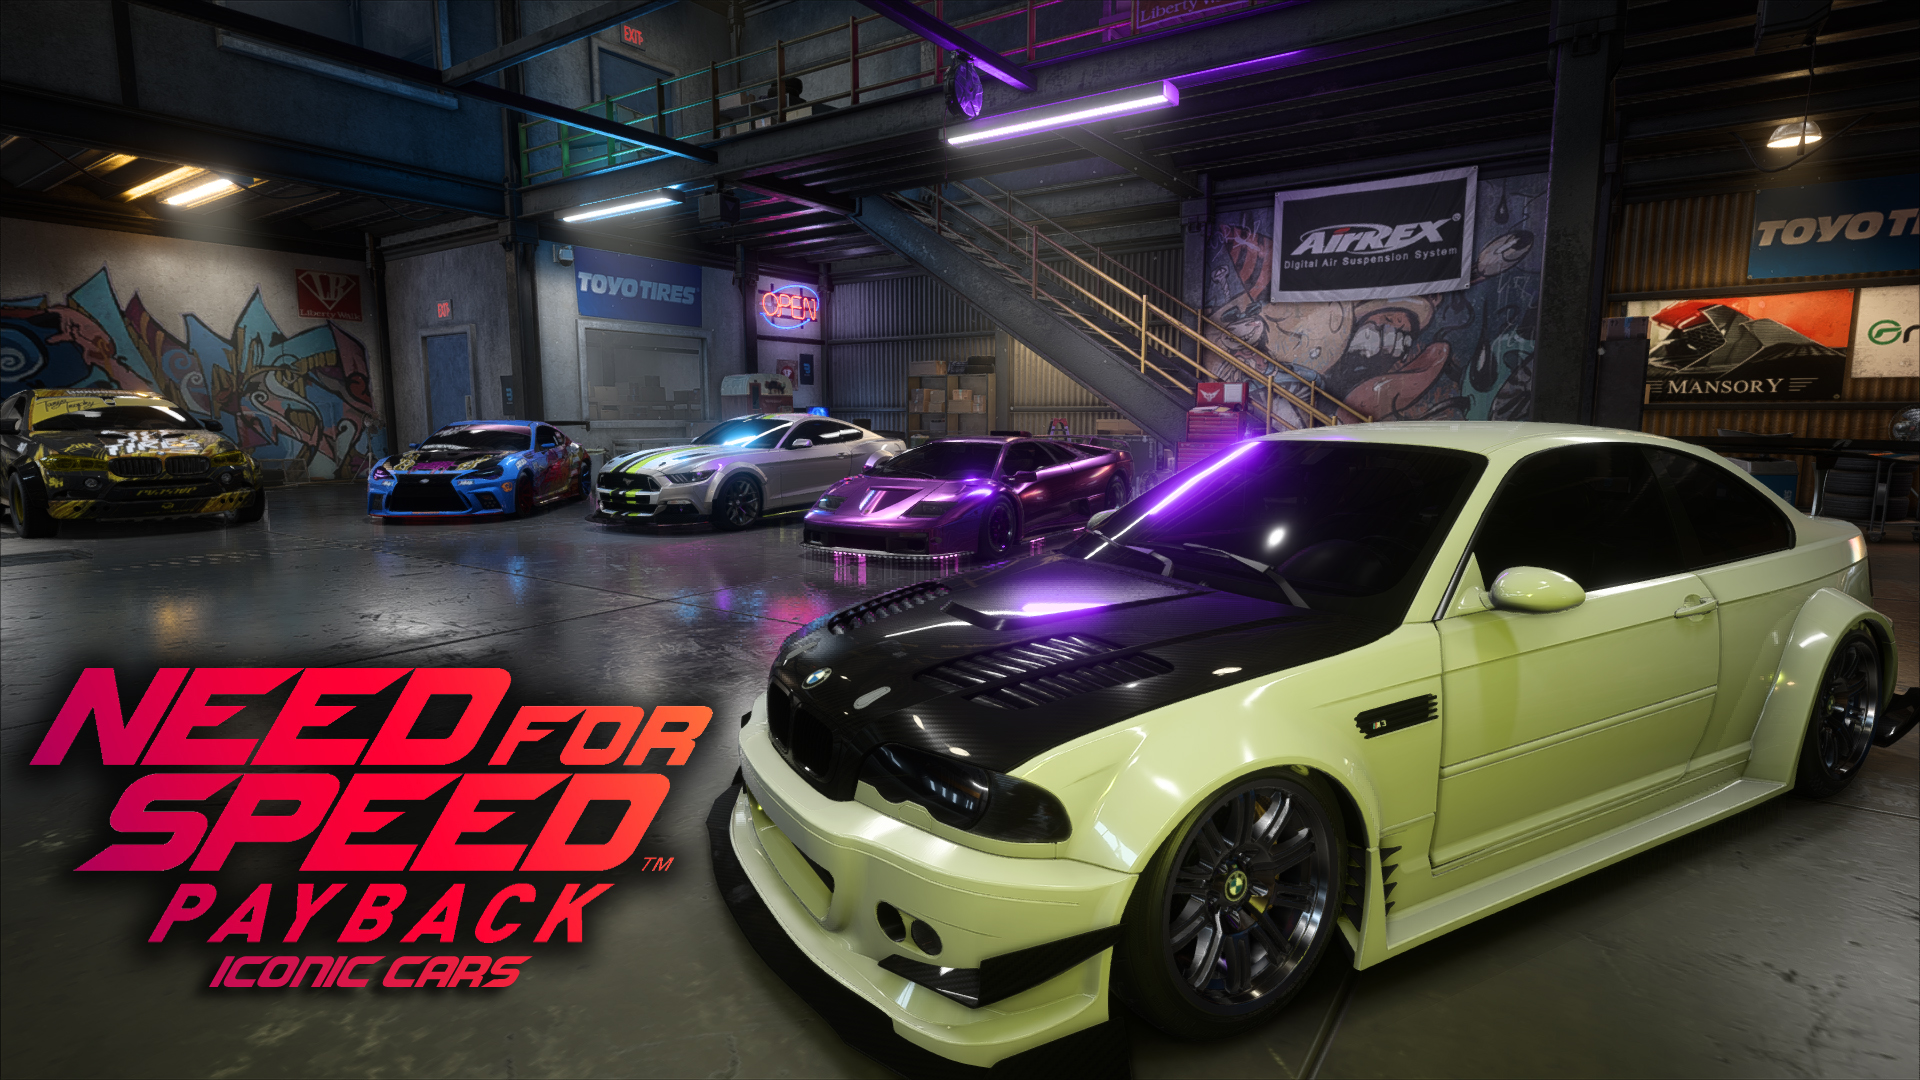 Need for speed payback patch download